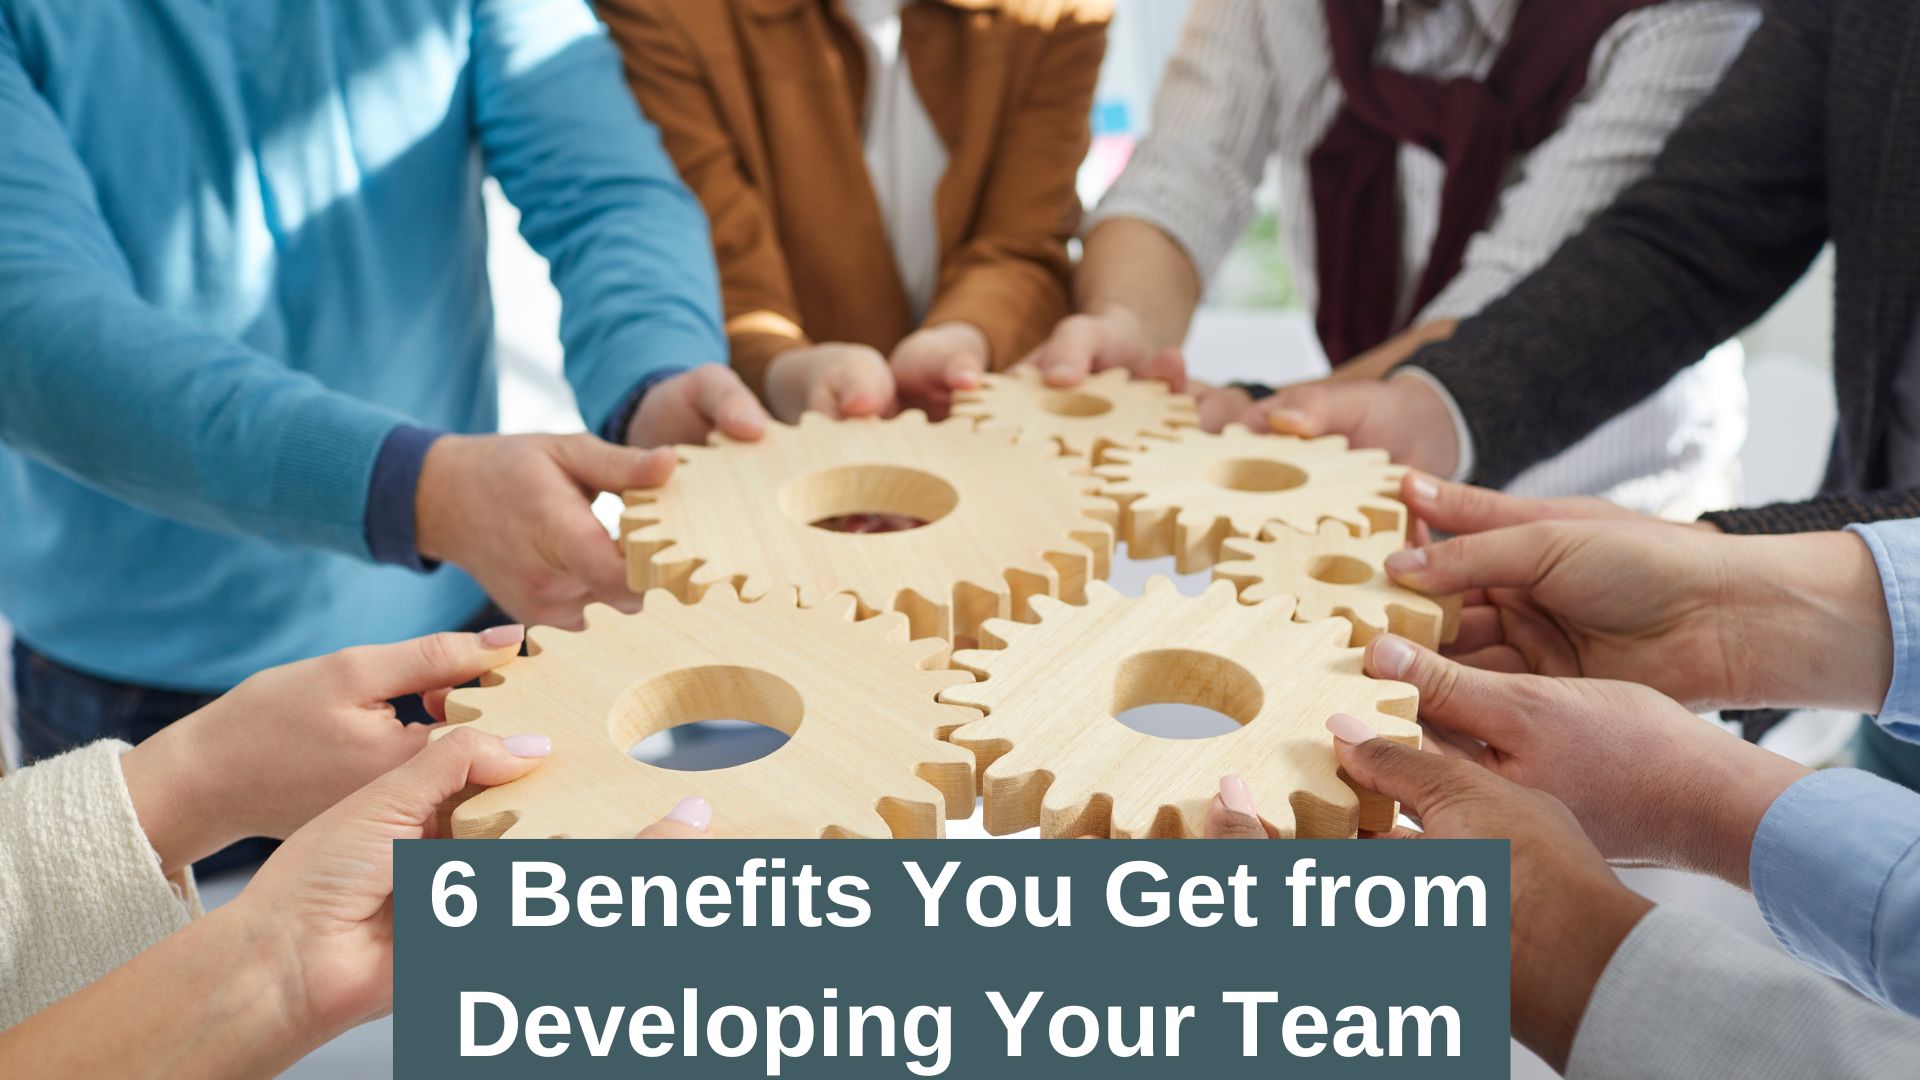 6 benefits you get from developing your team